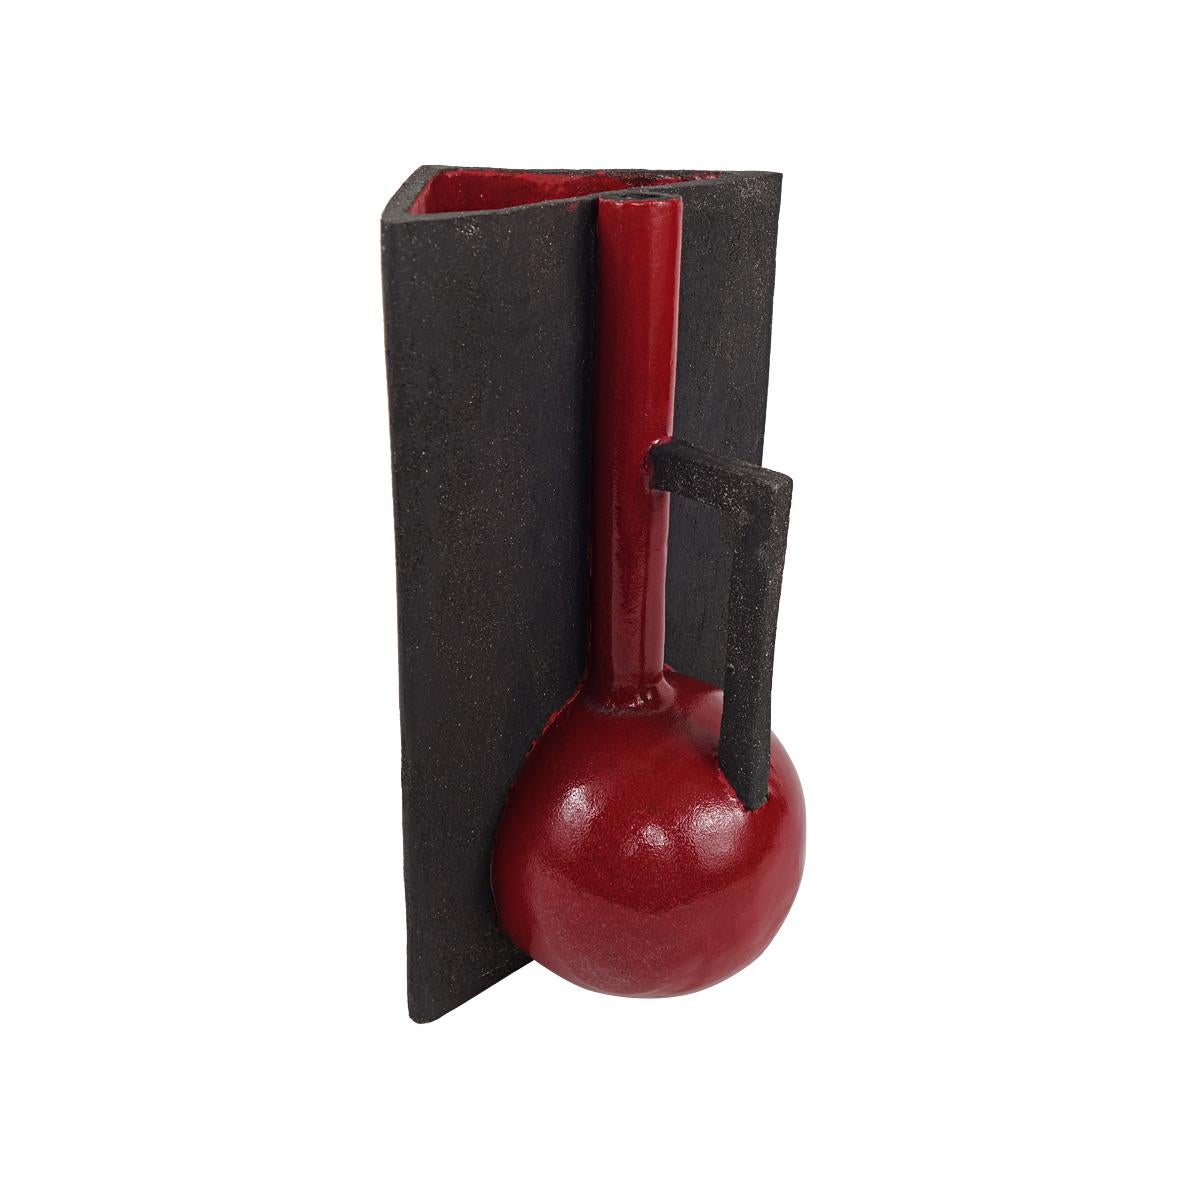 This ceramic vase is actually composed of two vases riveted together, having each their own shape, color and style. One is triangular matte black and handleless and only glazed on the inside. The other is round, and shiny red matte with a square